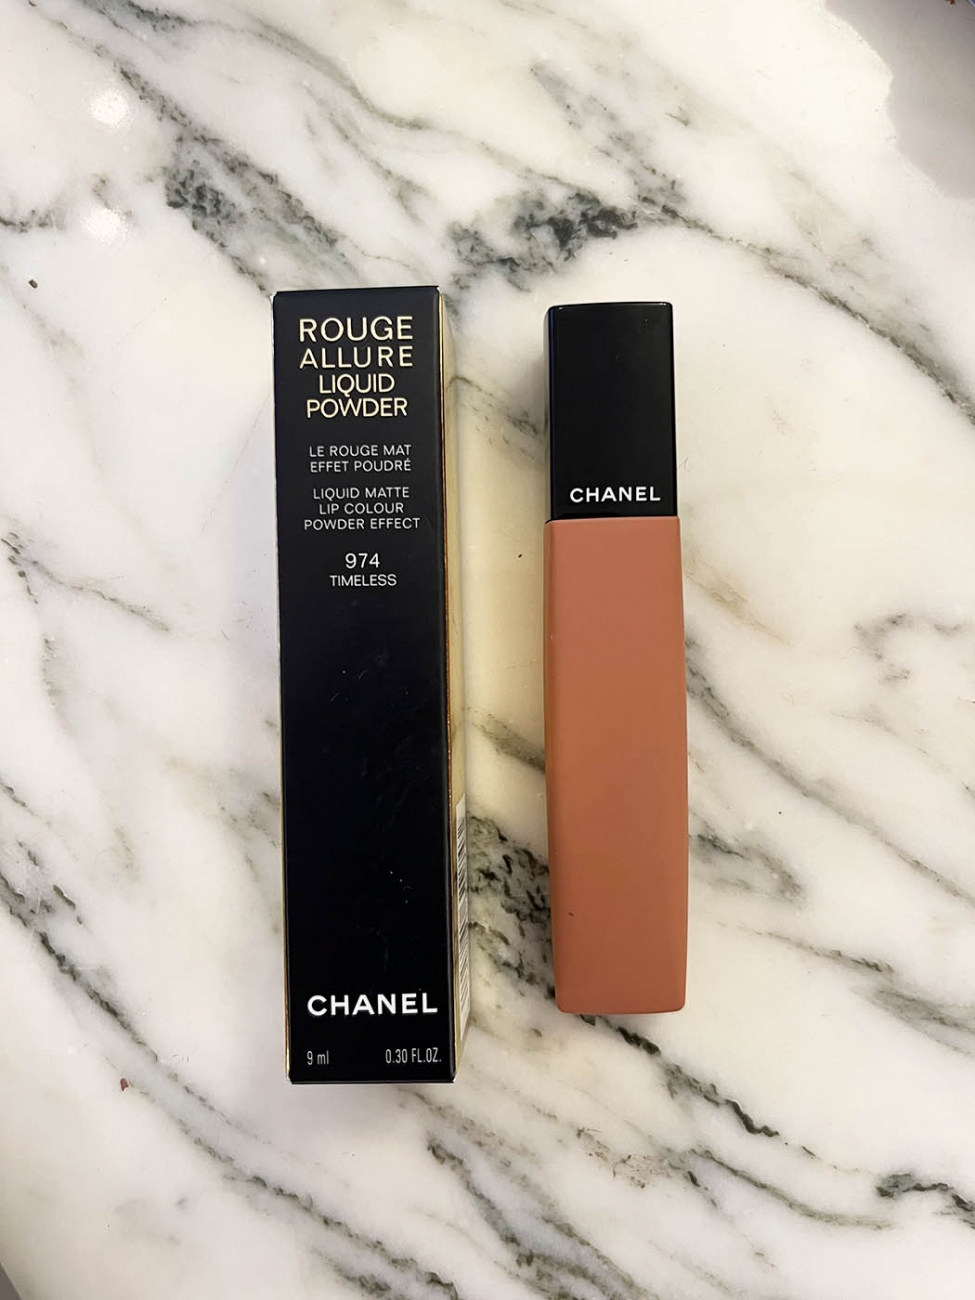 Boutique CHANEL LE ROUGE ALLURE Liquid Powder lipstick in pink 974 Timeless